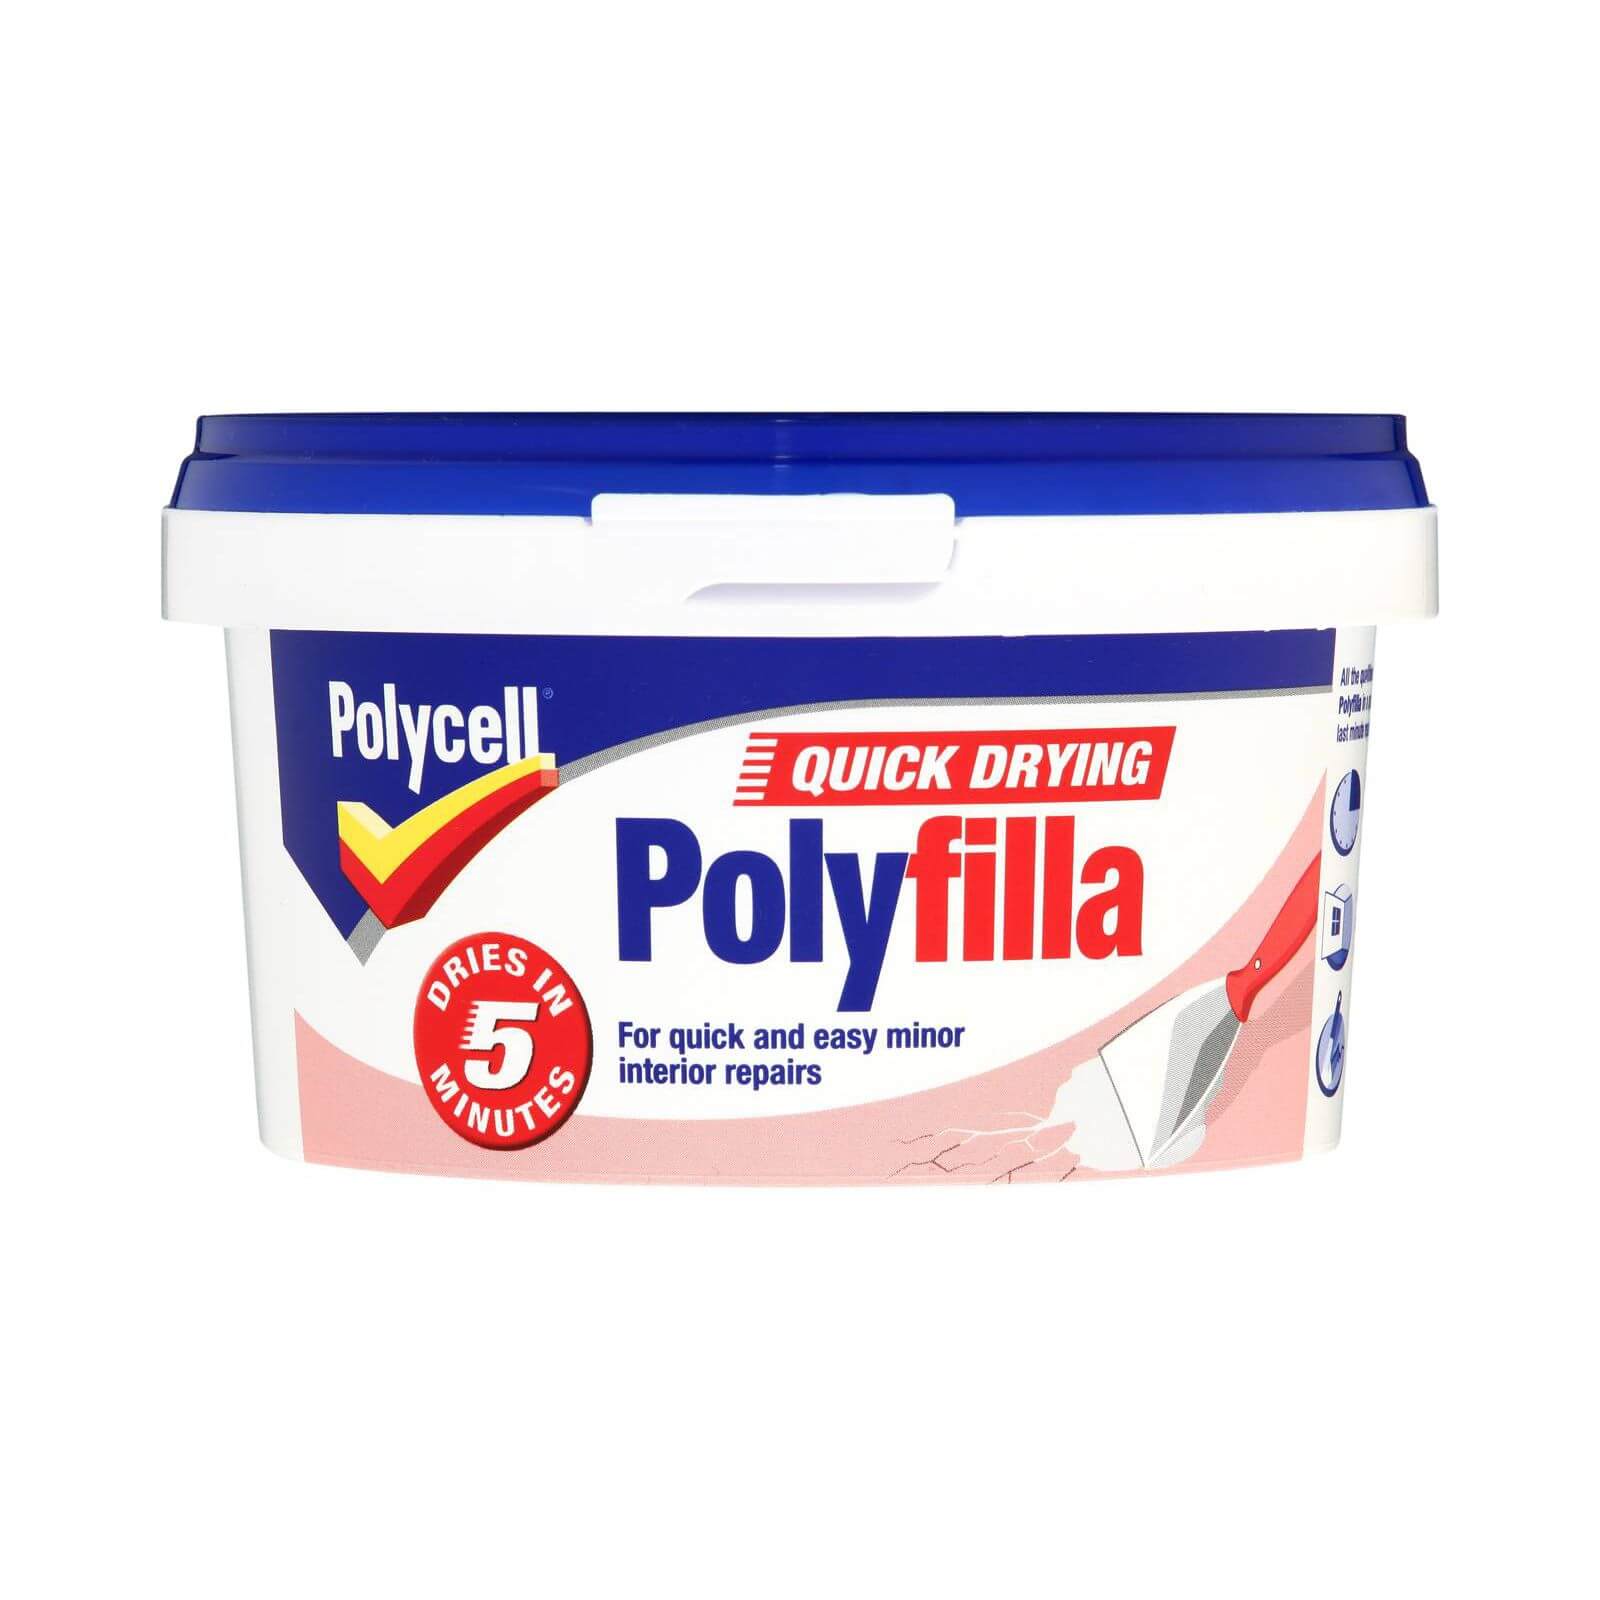 Polycell Quick Dry Polyfilla - 500g